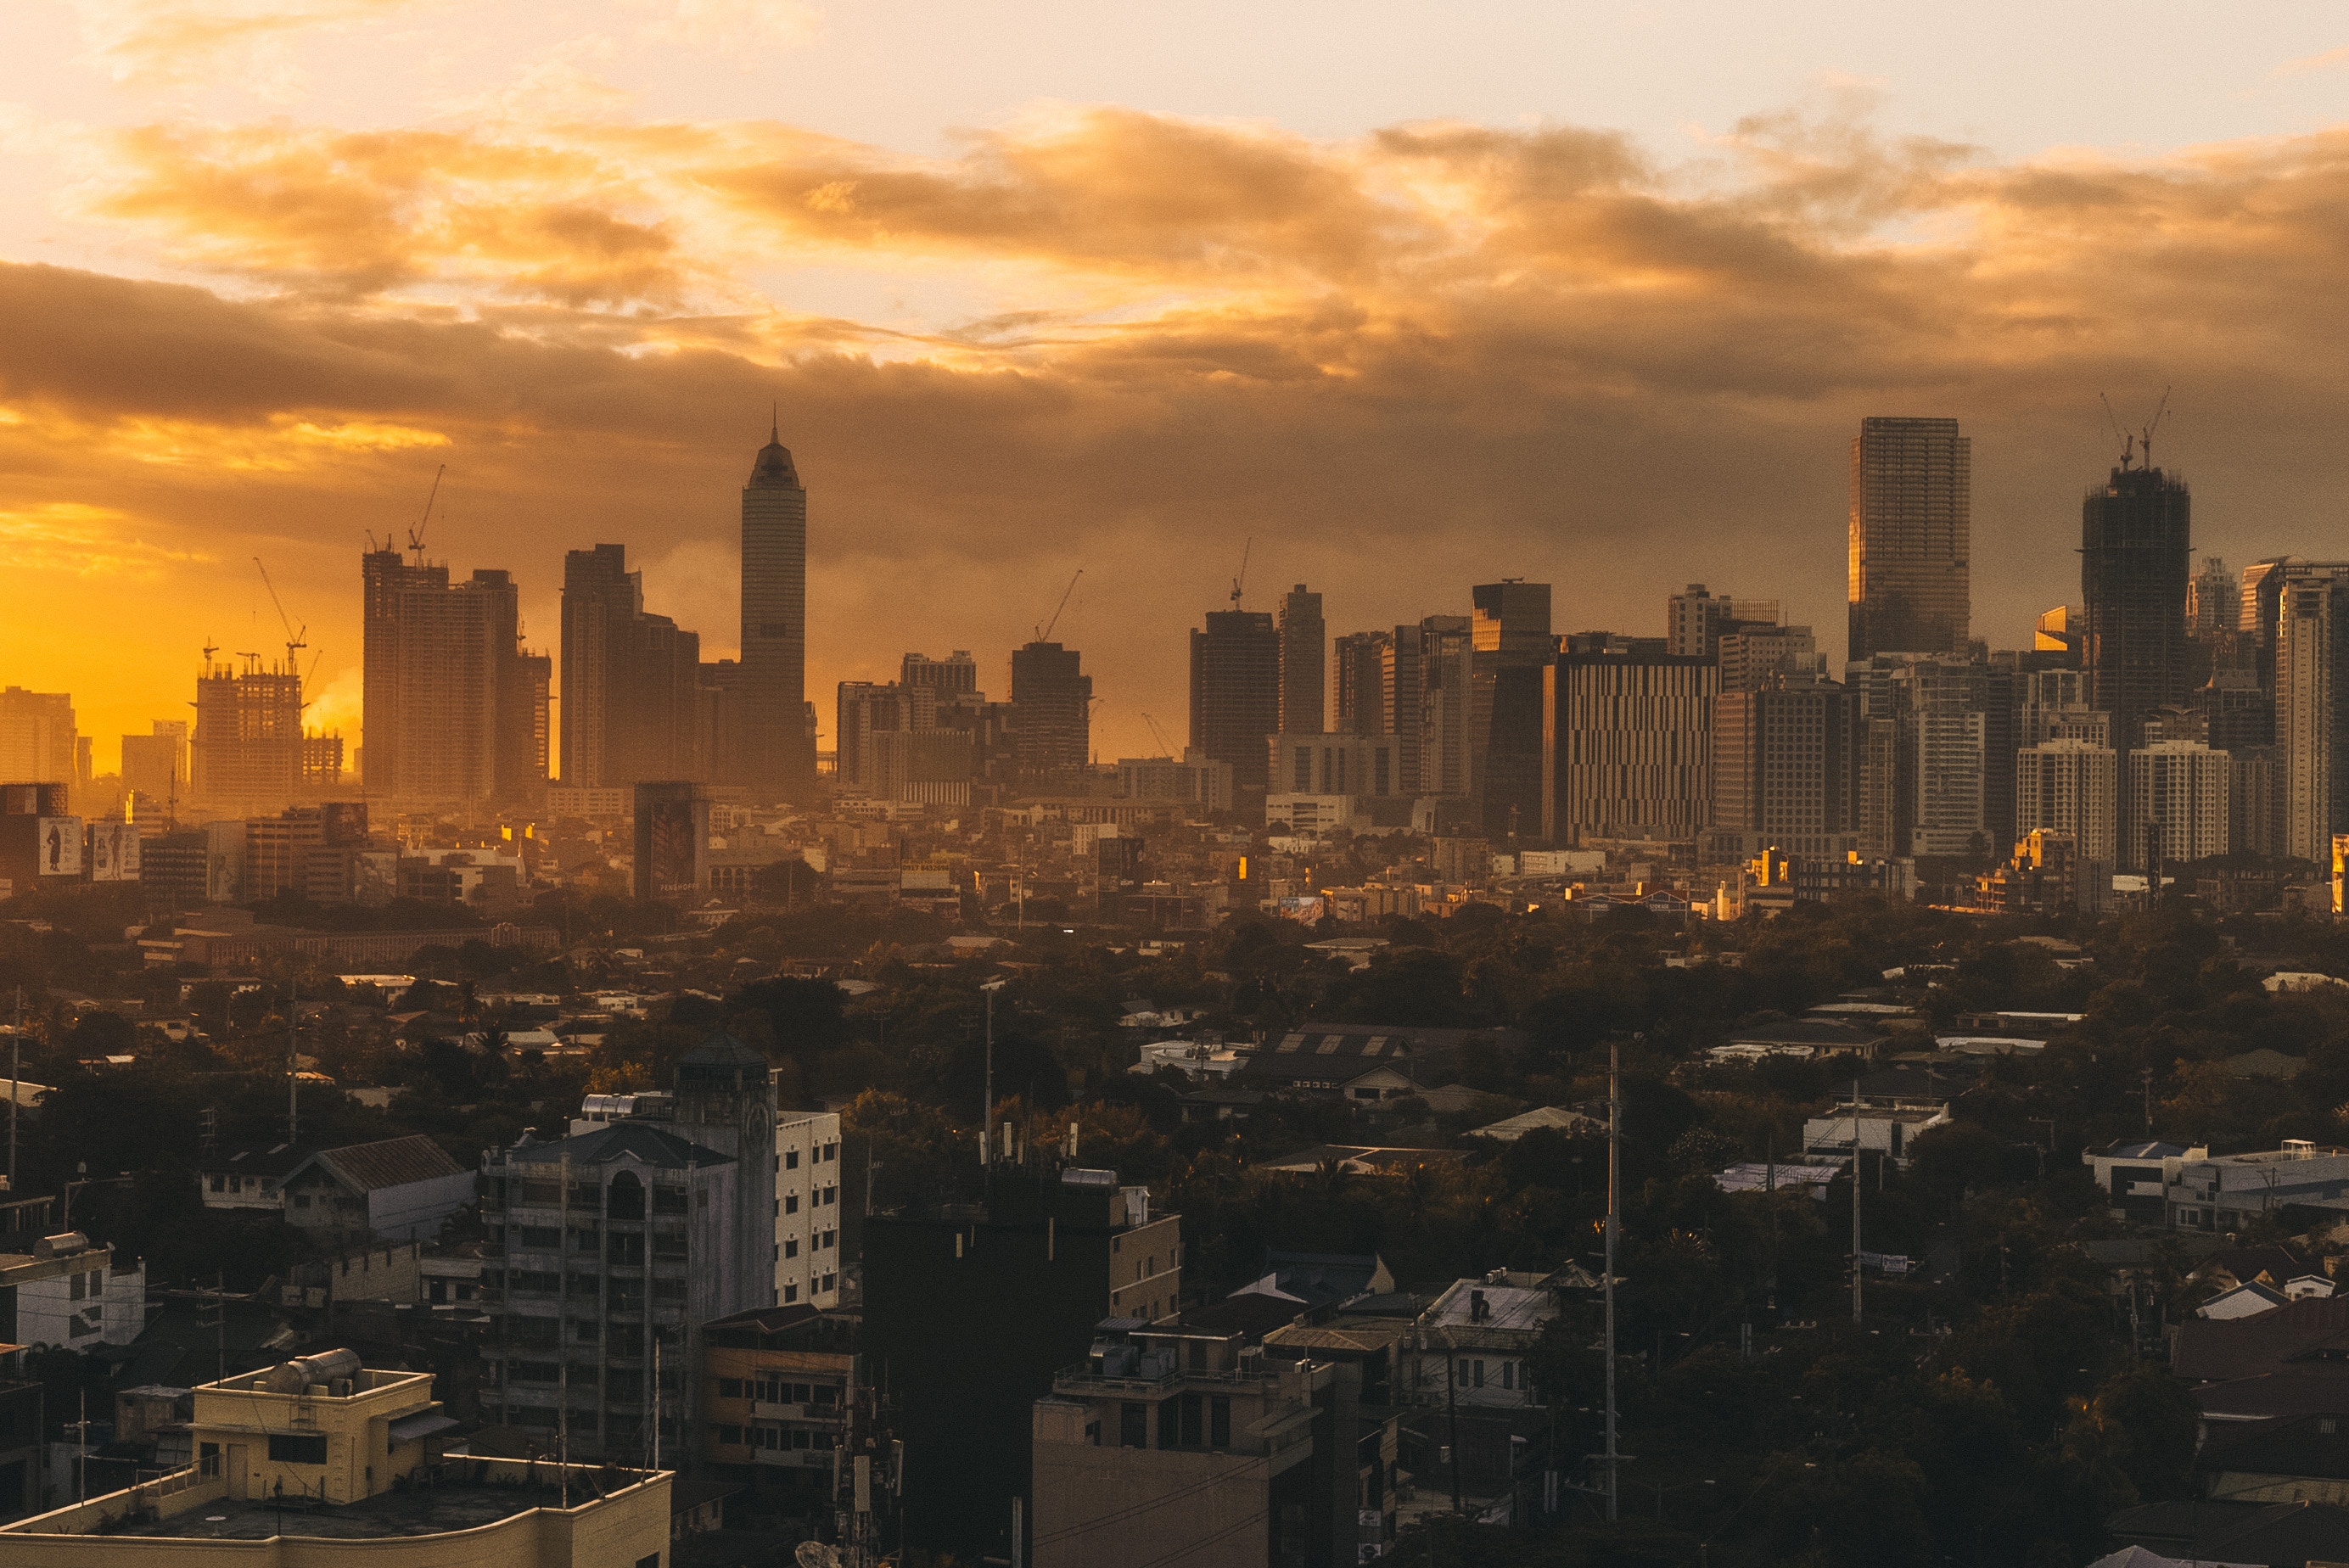 Philippine startups lag behind Southeast Asian counterparts in 2018 funding, but 2019 looks rosy